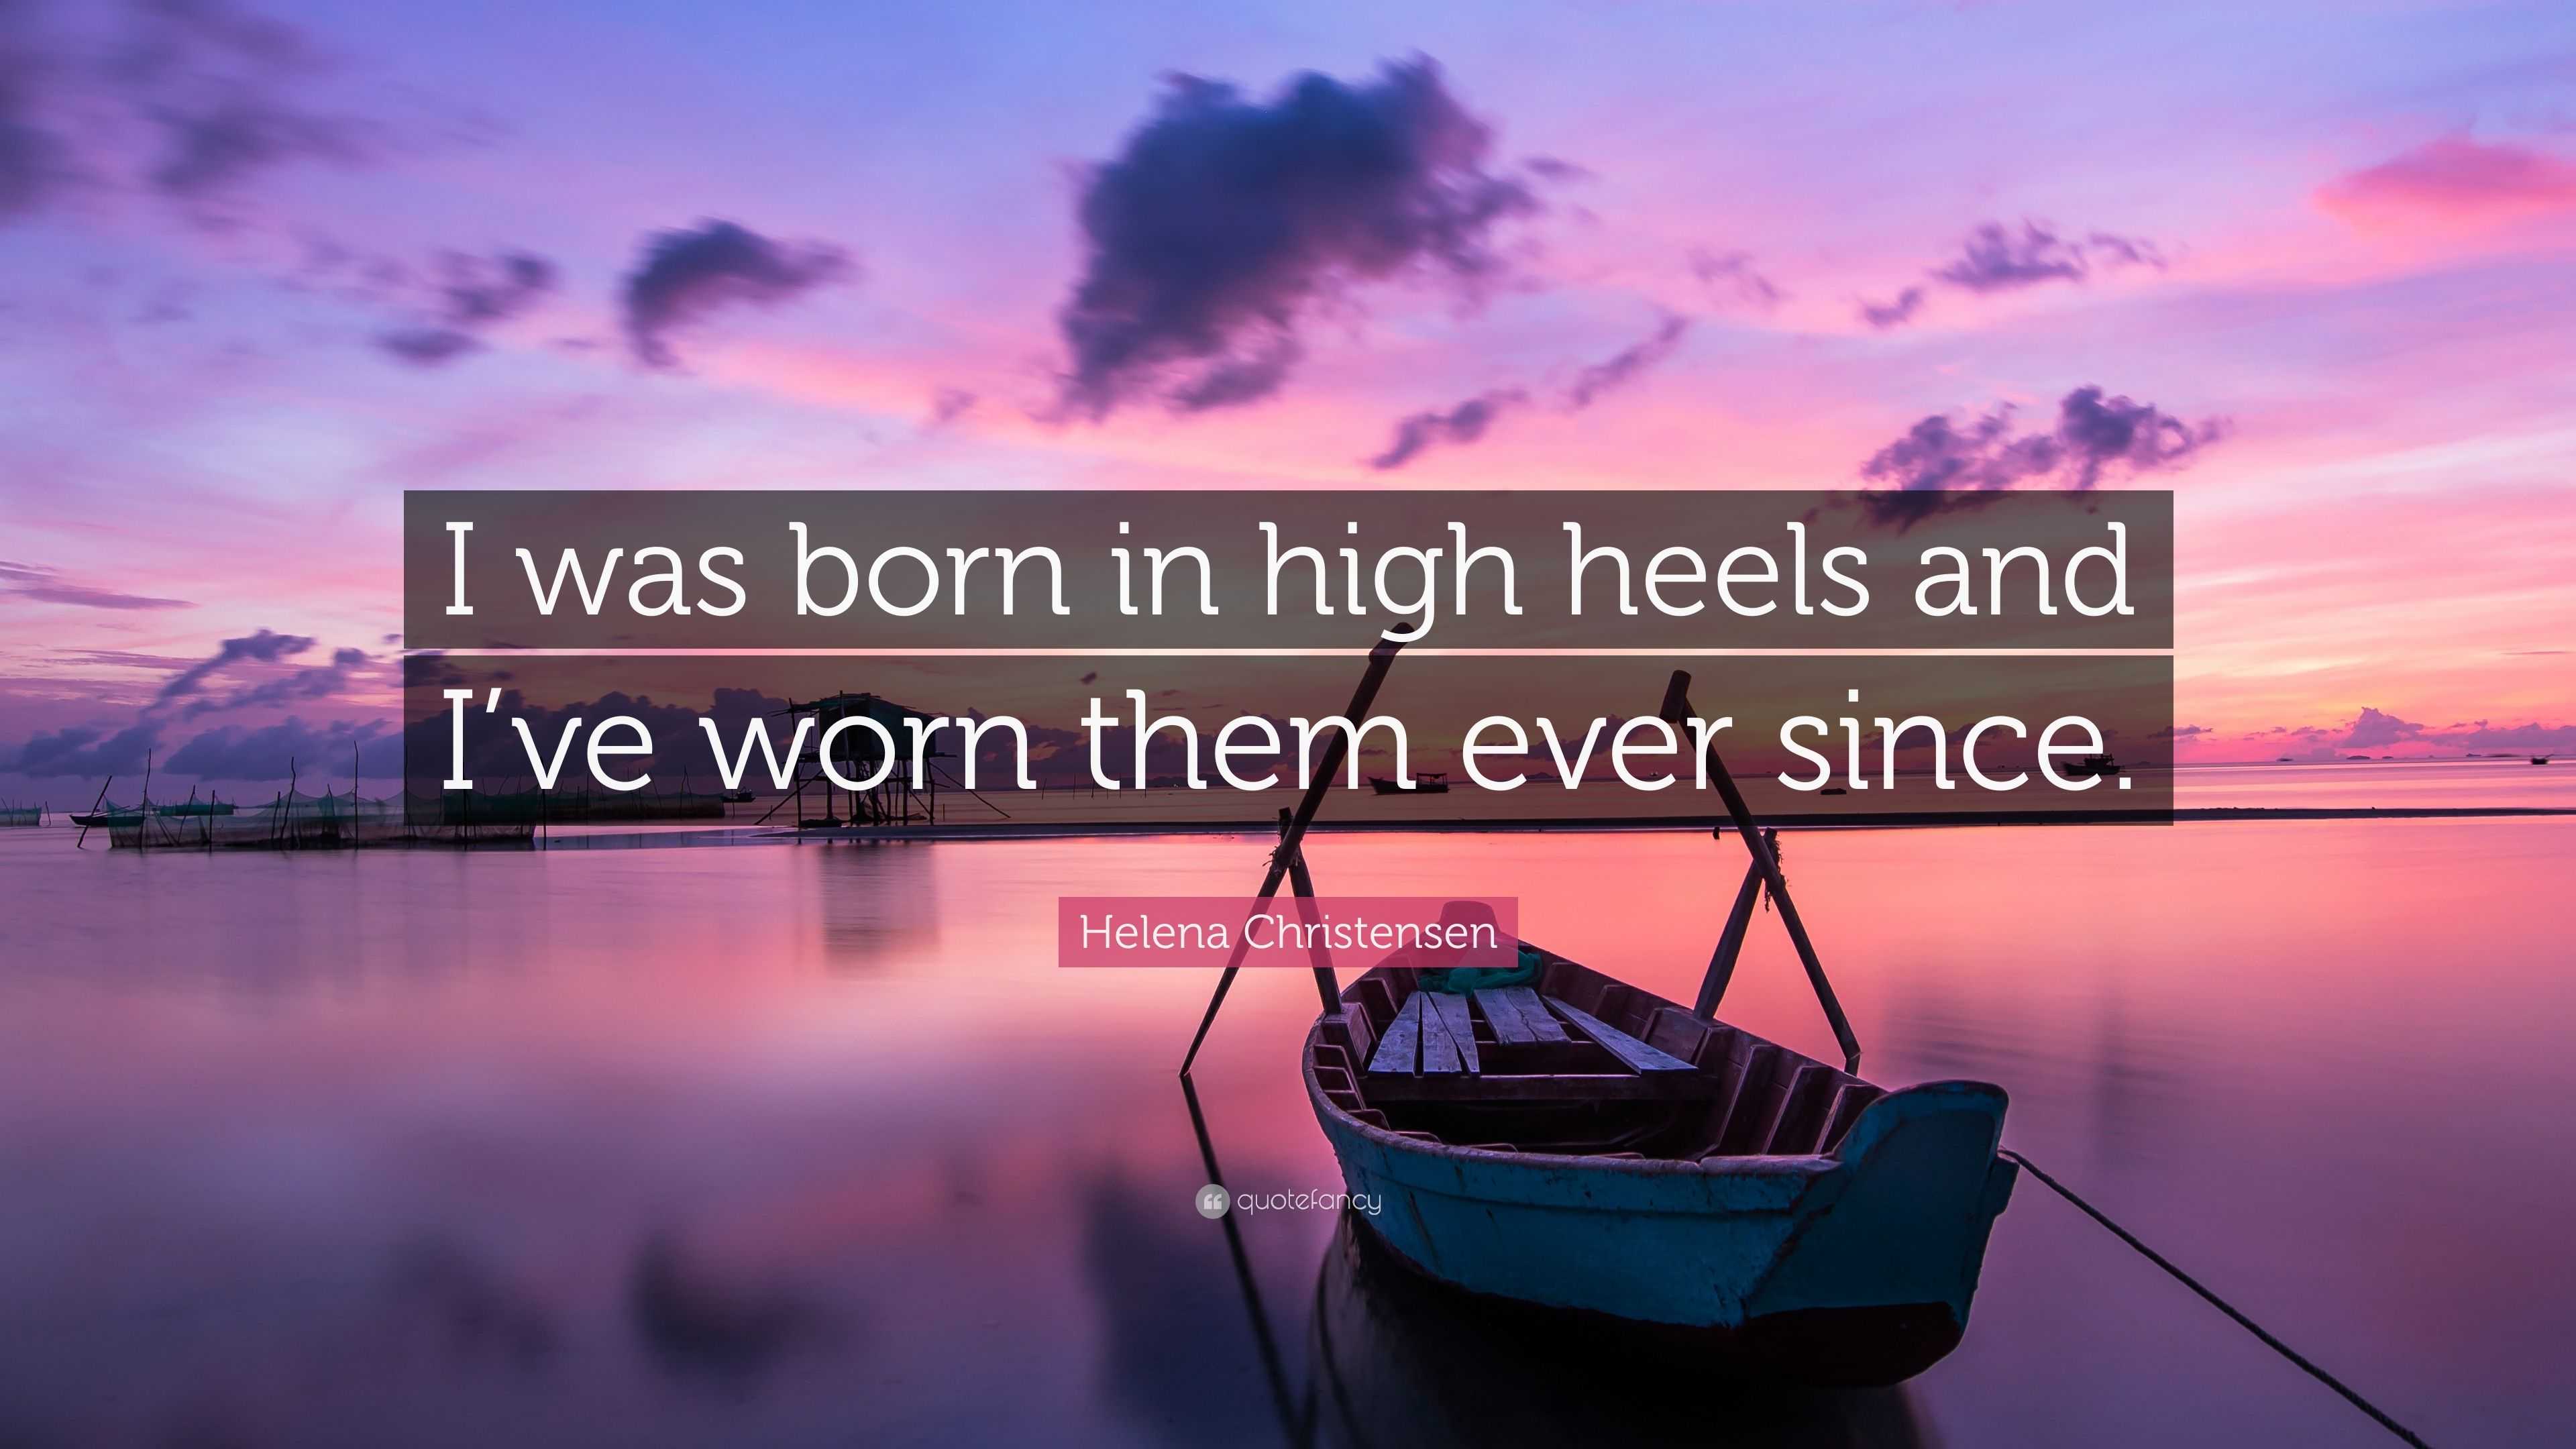 Shoes Quotes: Sayings: Instagram Captions for Shoe Lovers | DC.ONE